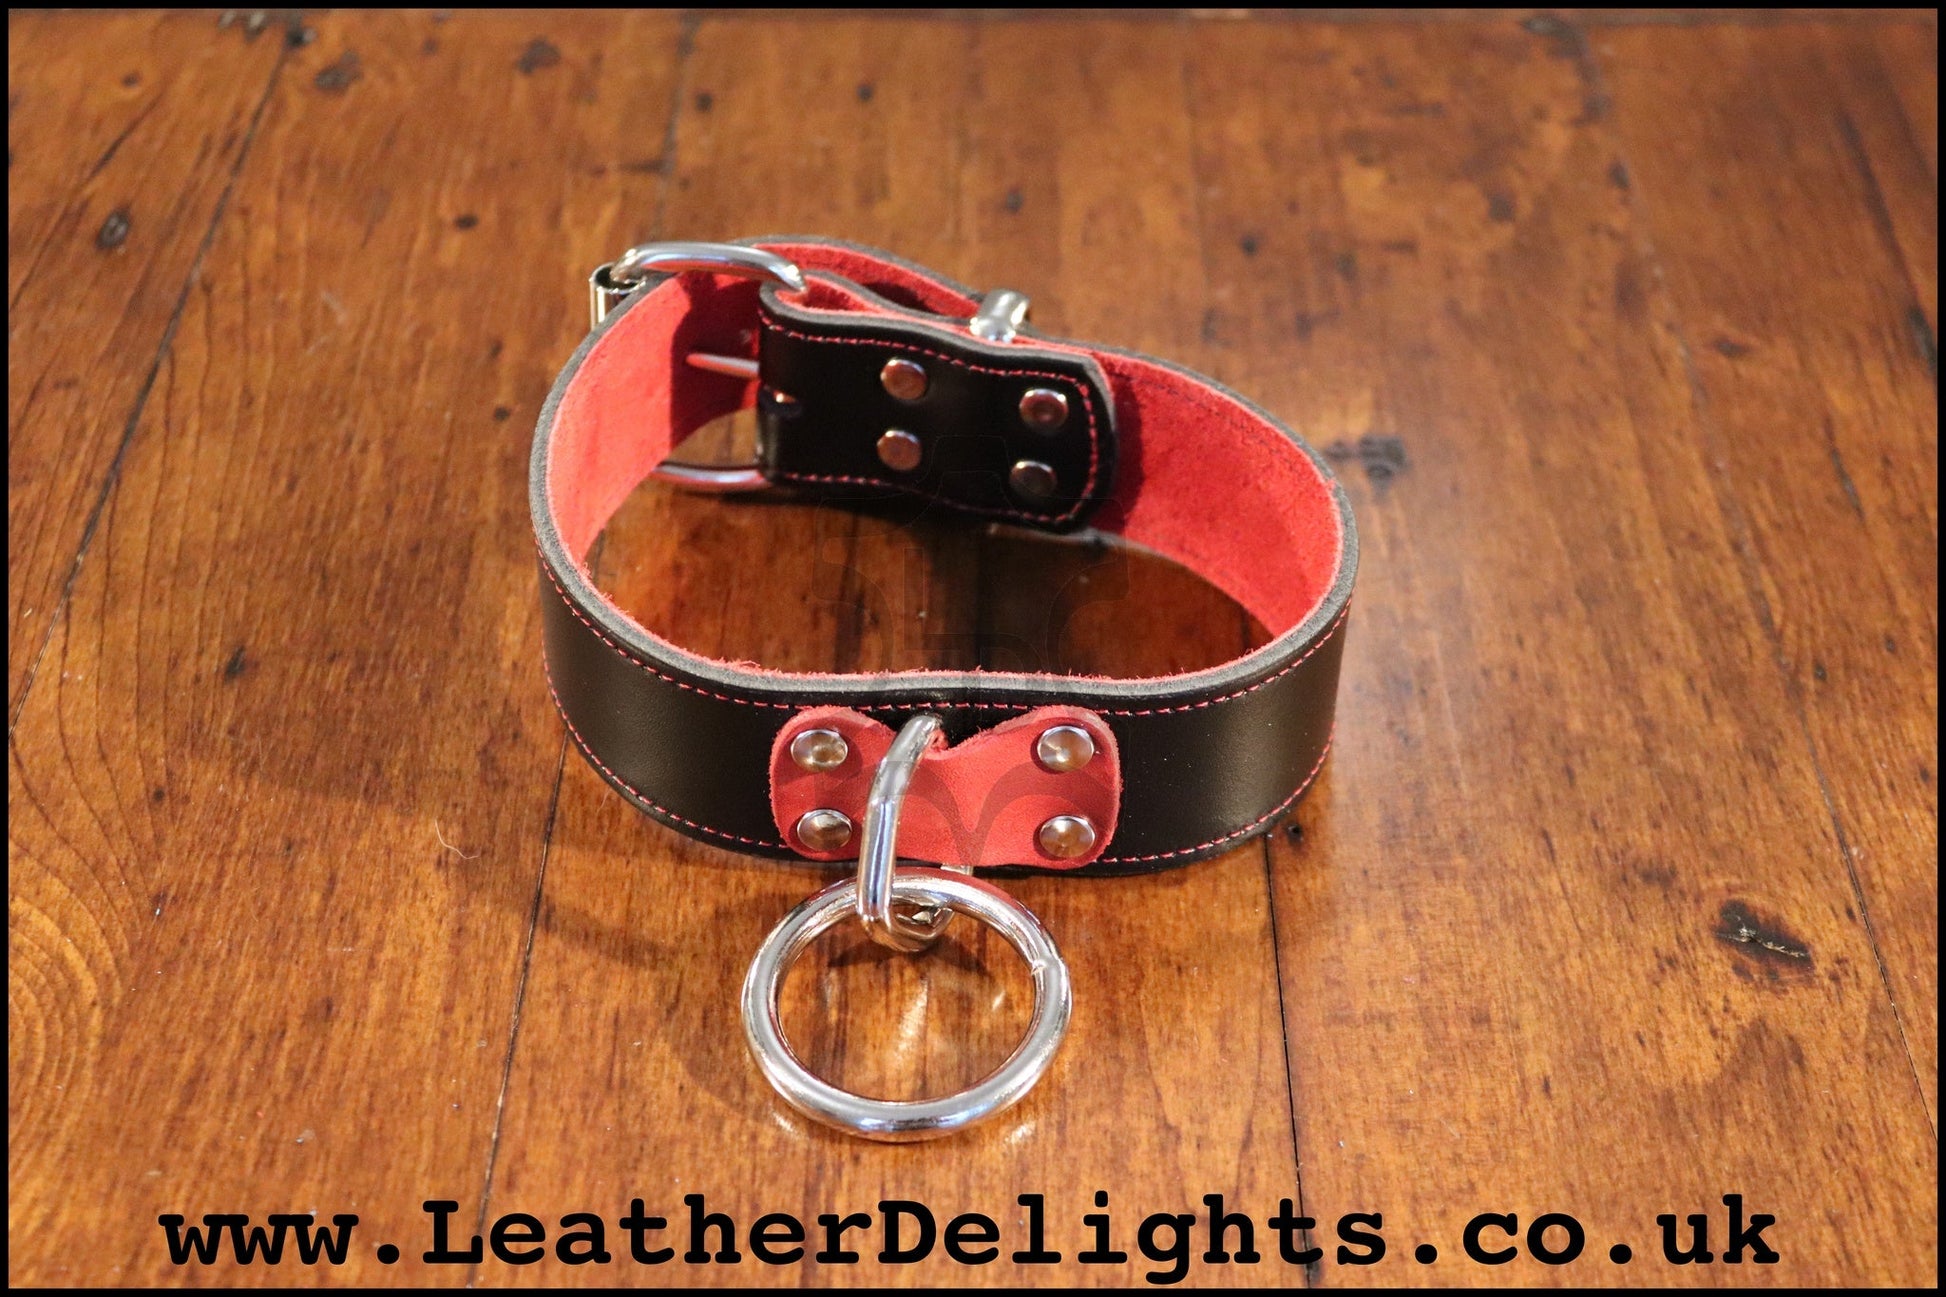 Heavy Duty Collar with Welded O Ring - Leather Delights